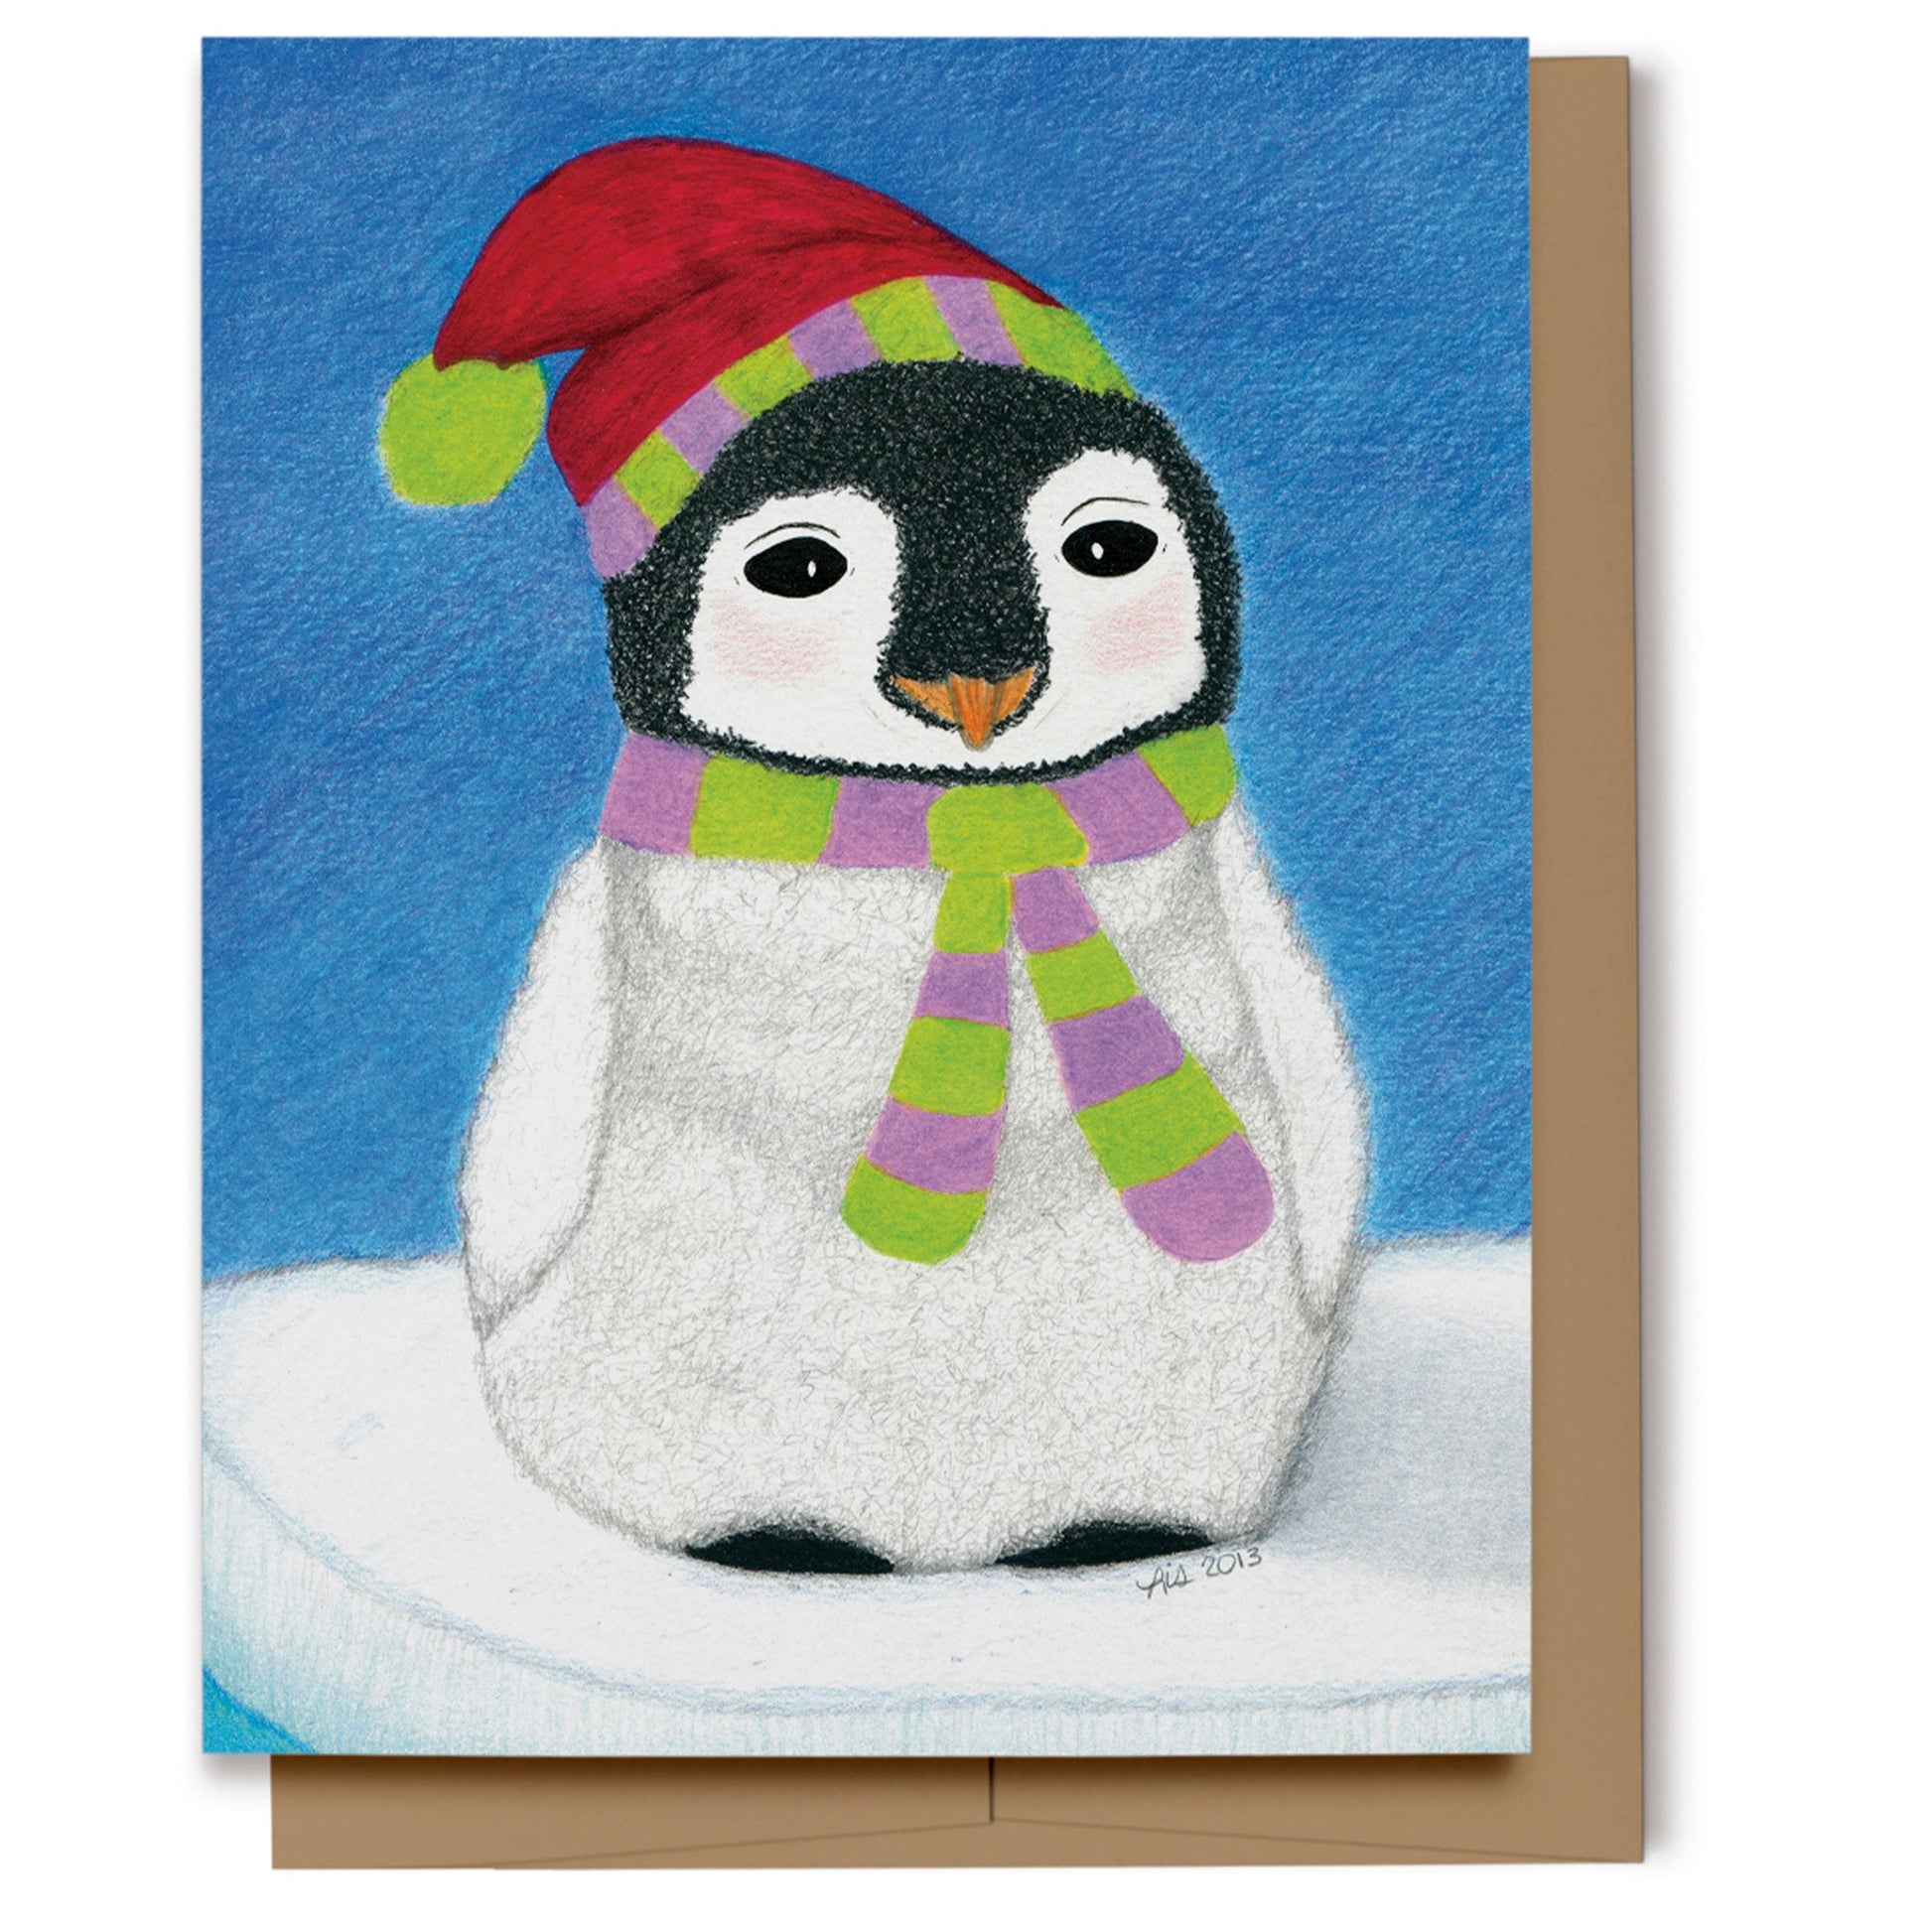 Christmas card featuring a baby penguin wearing a Santa hat with a scarf standing on an iceberg. Hand drawing using markers and colored pencils.